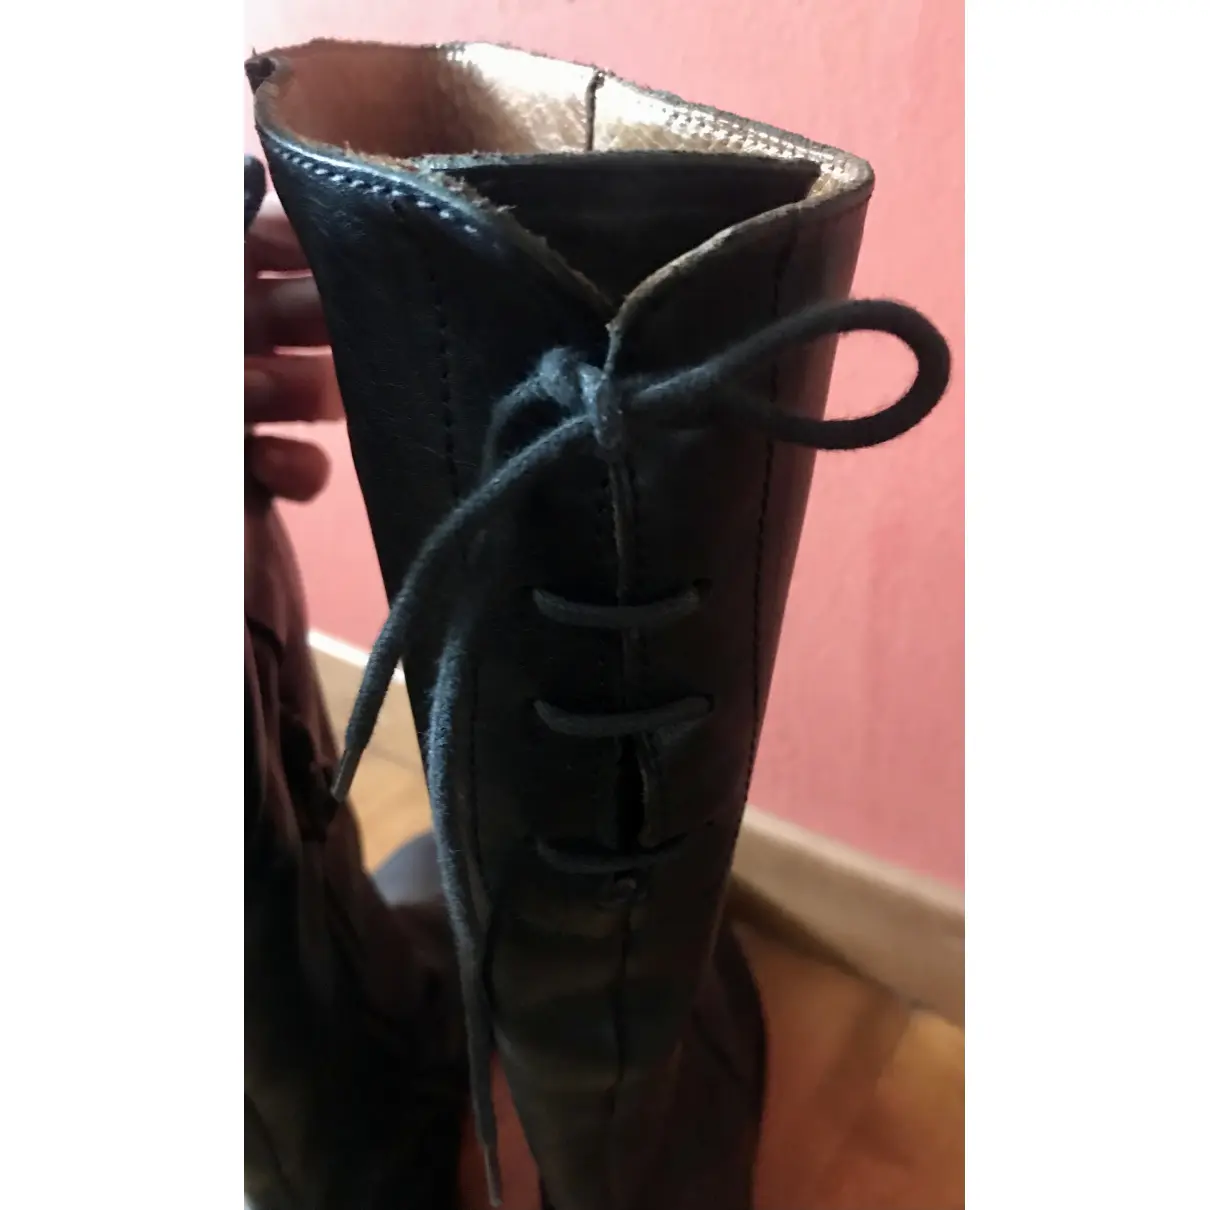 Leather riding boots Fiorentini+Baker